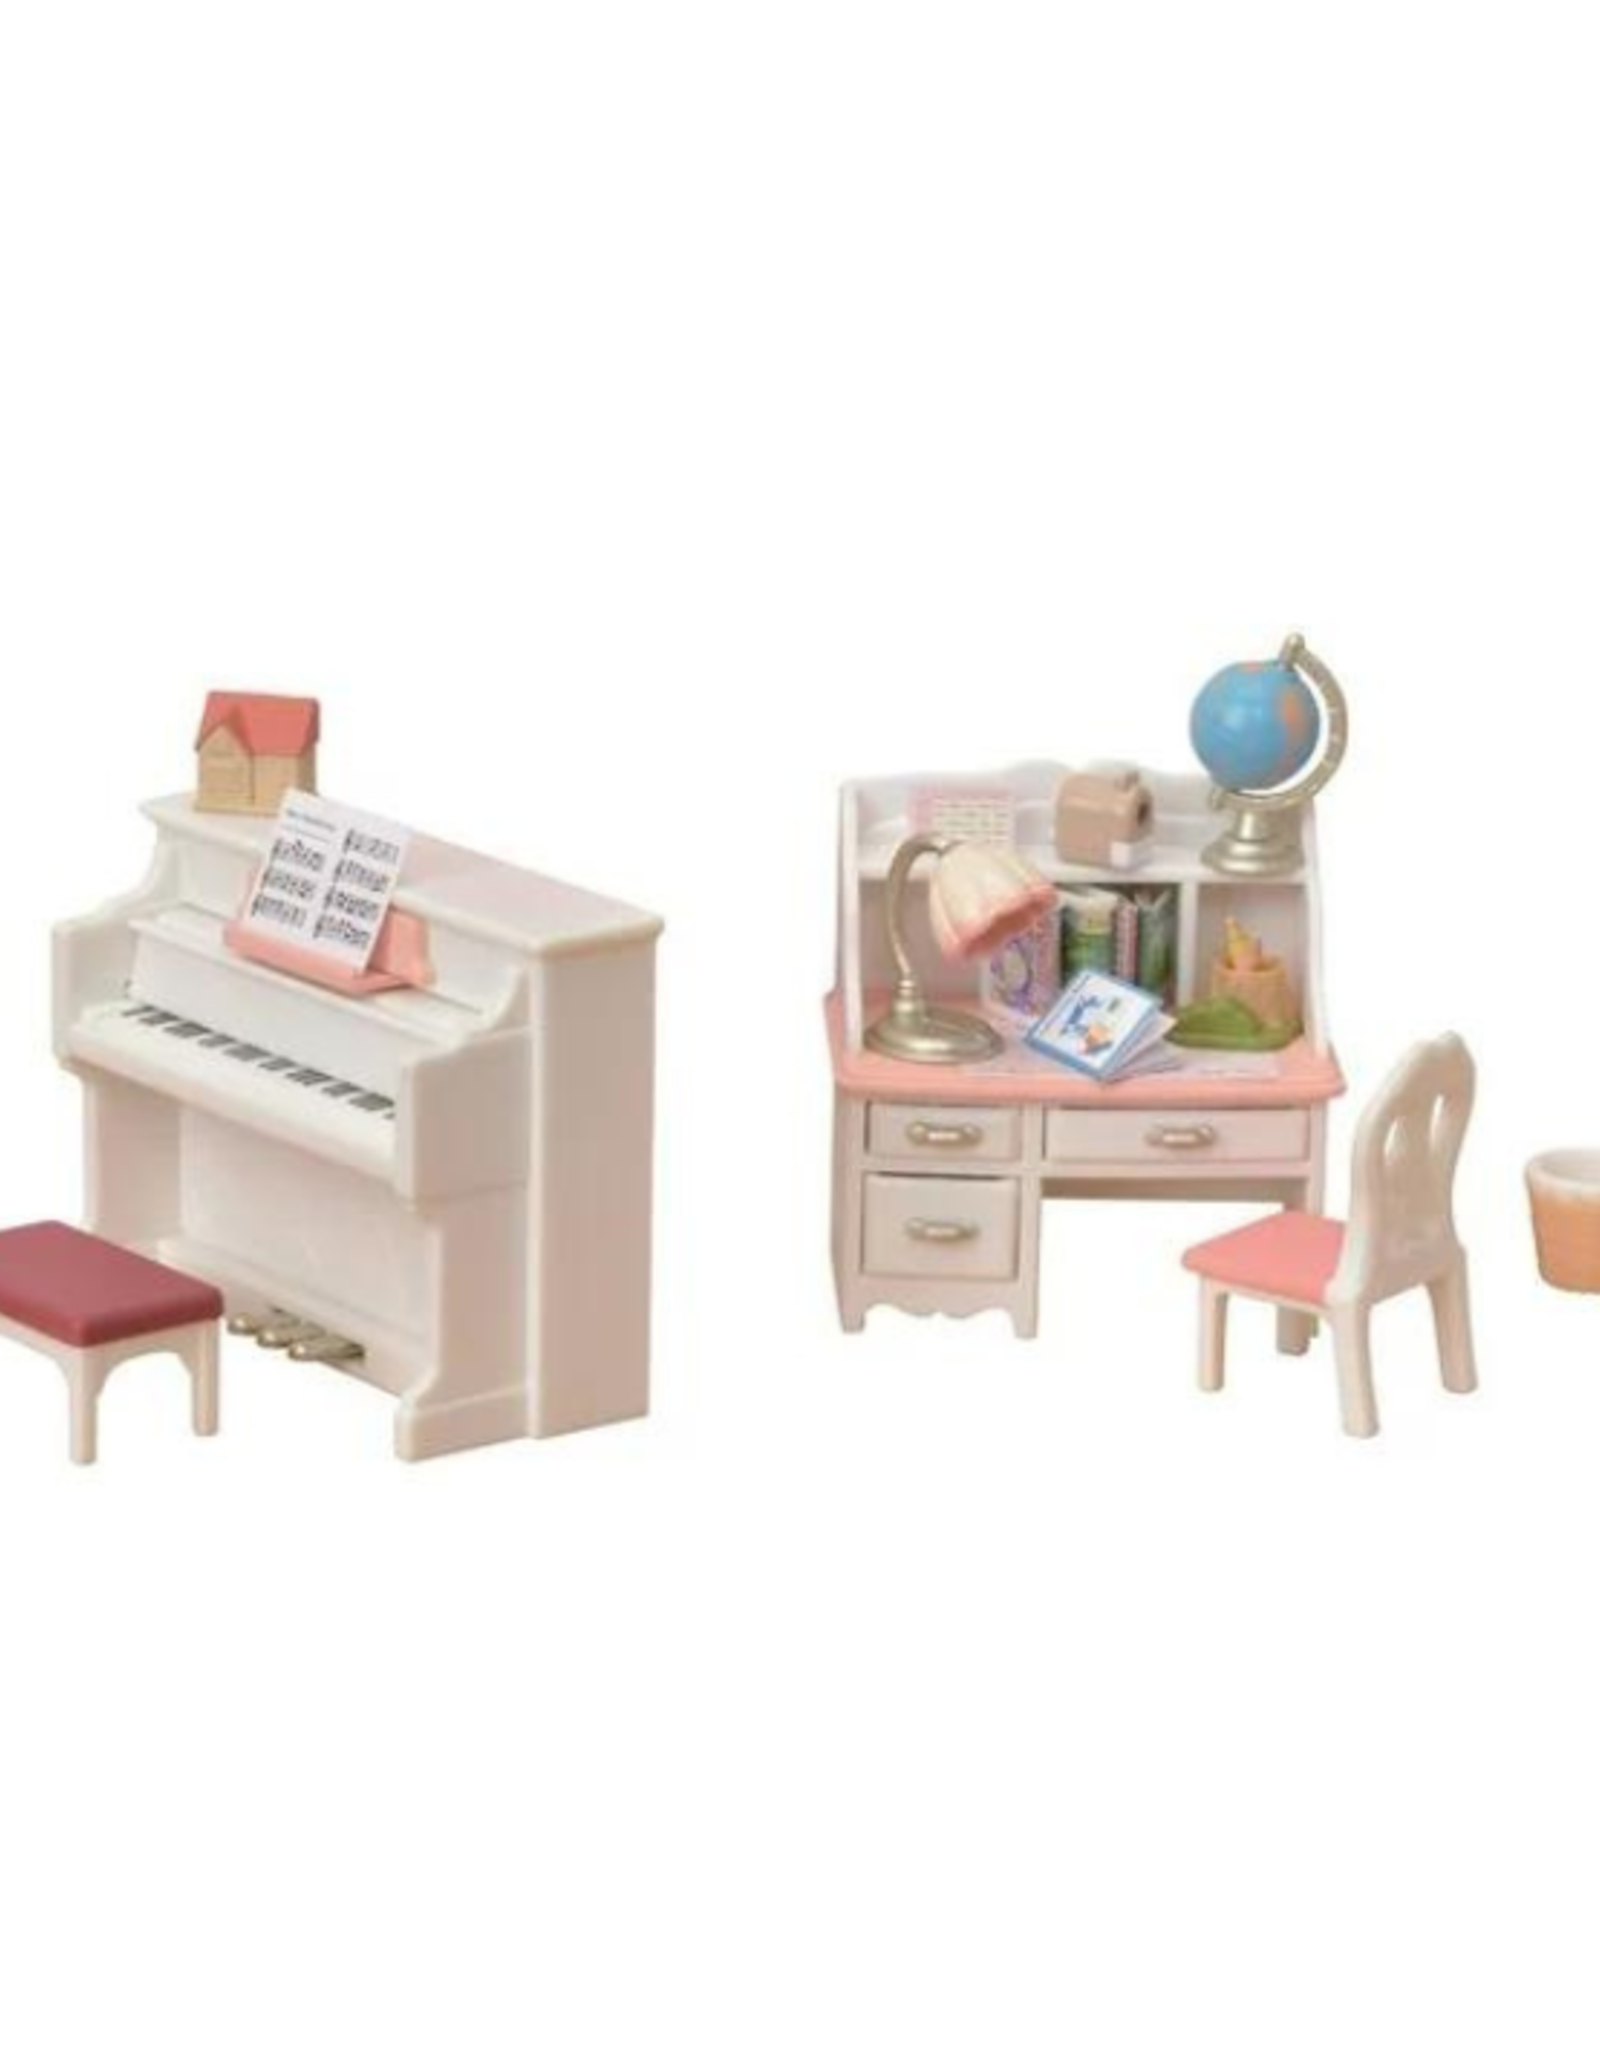 Calico Critters Calico Critters - Piano and Desk Set